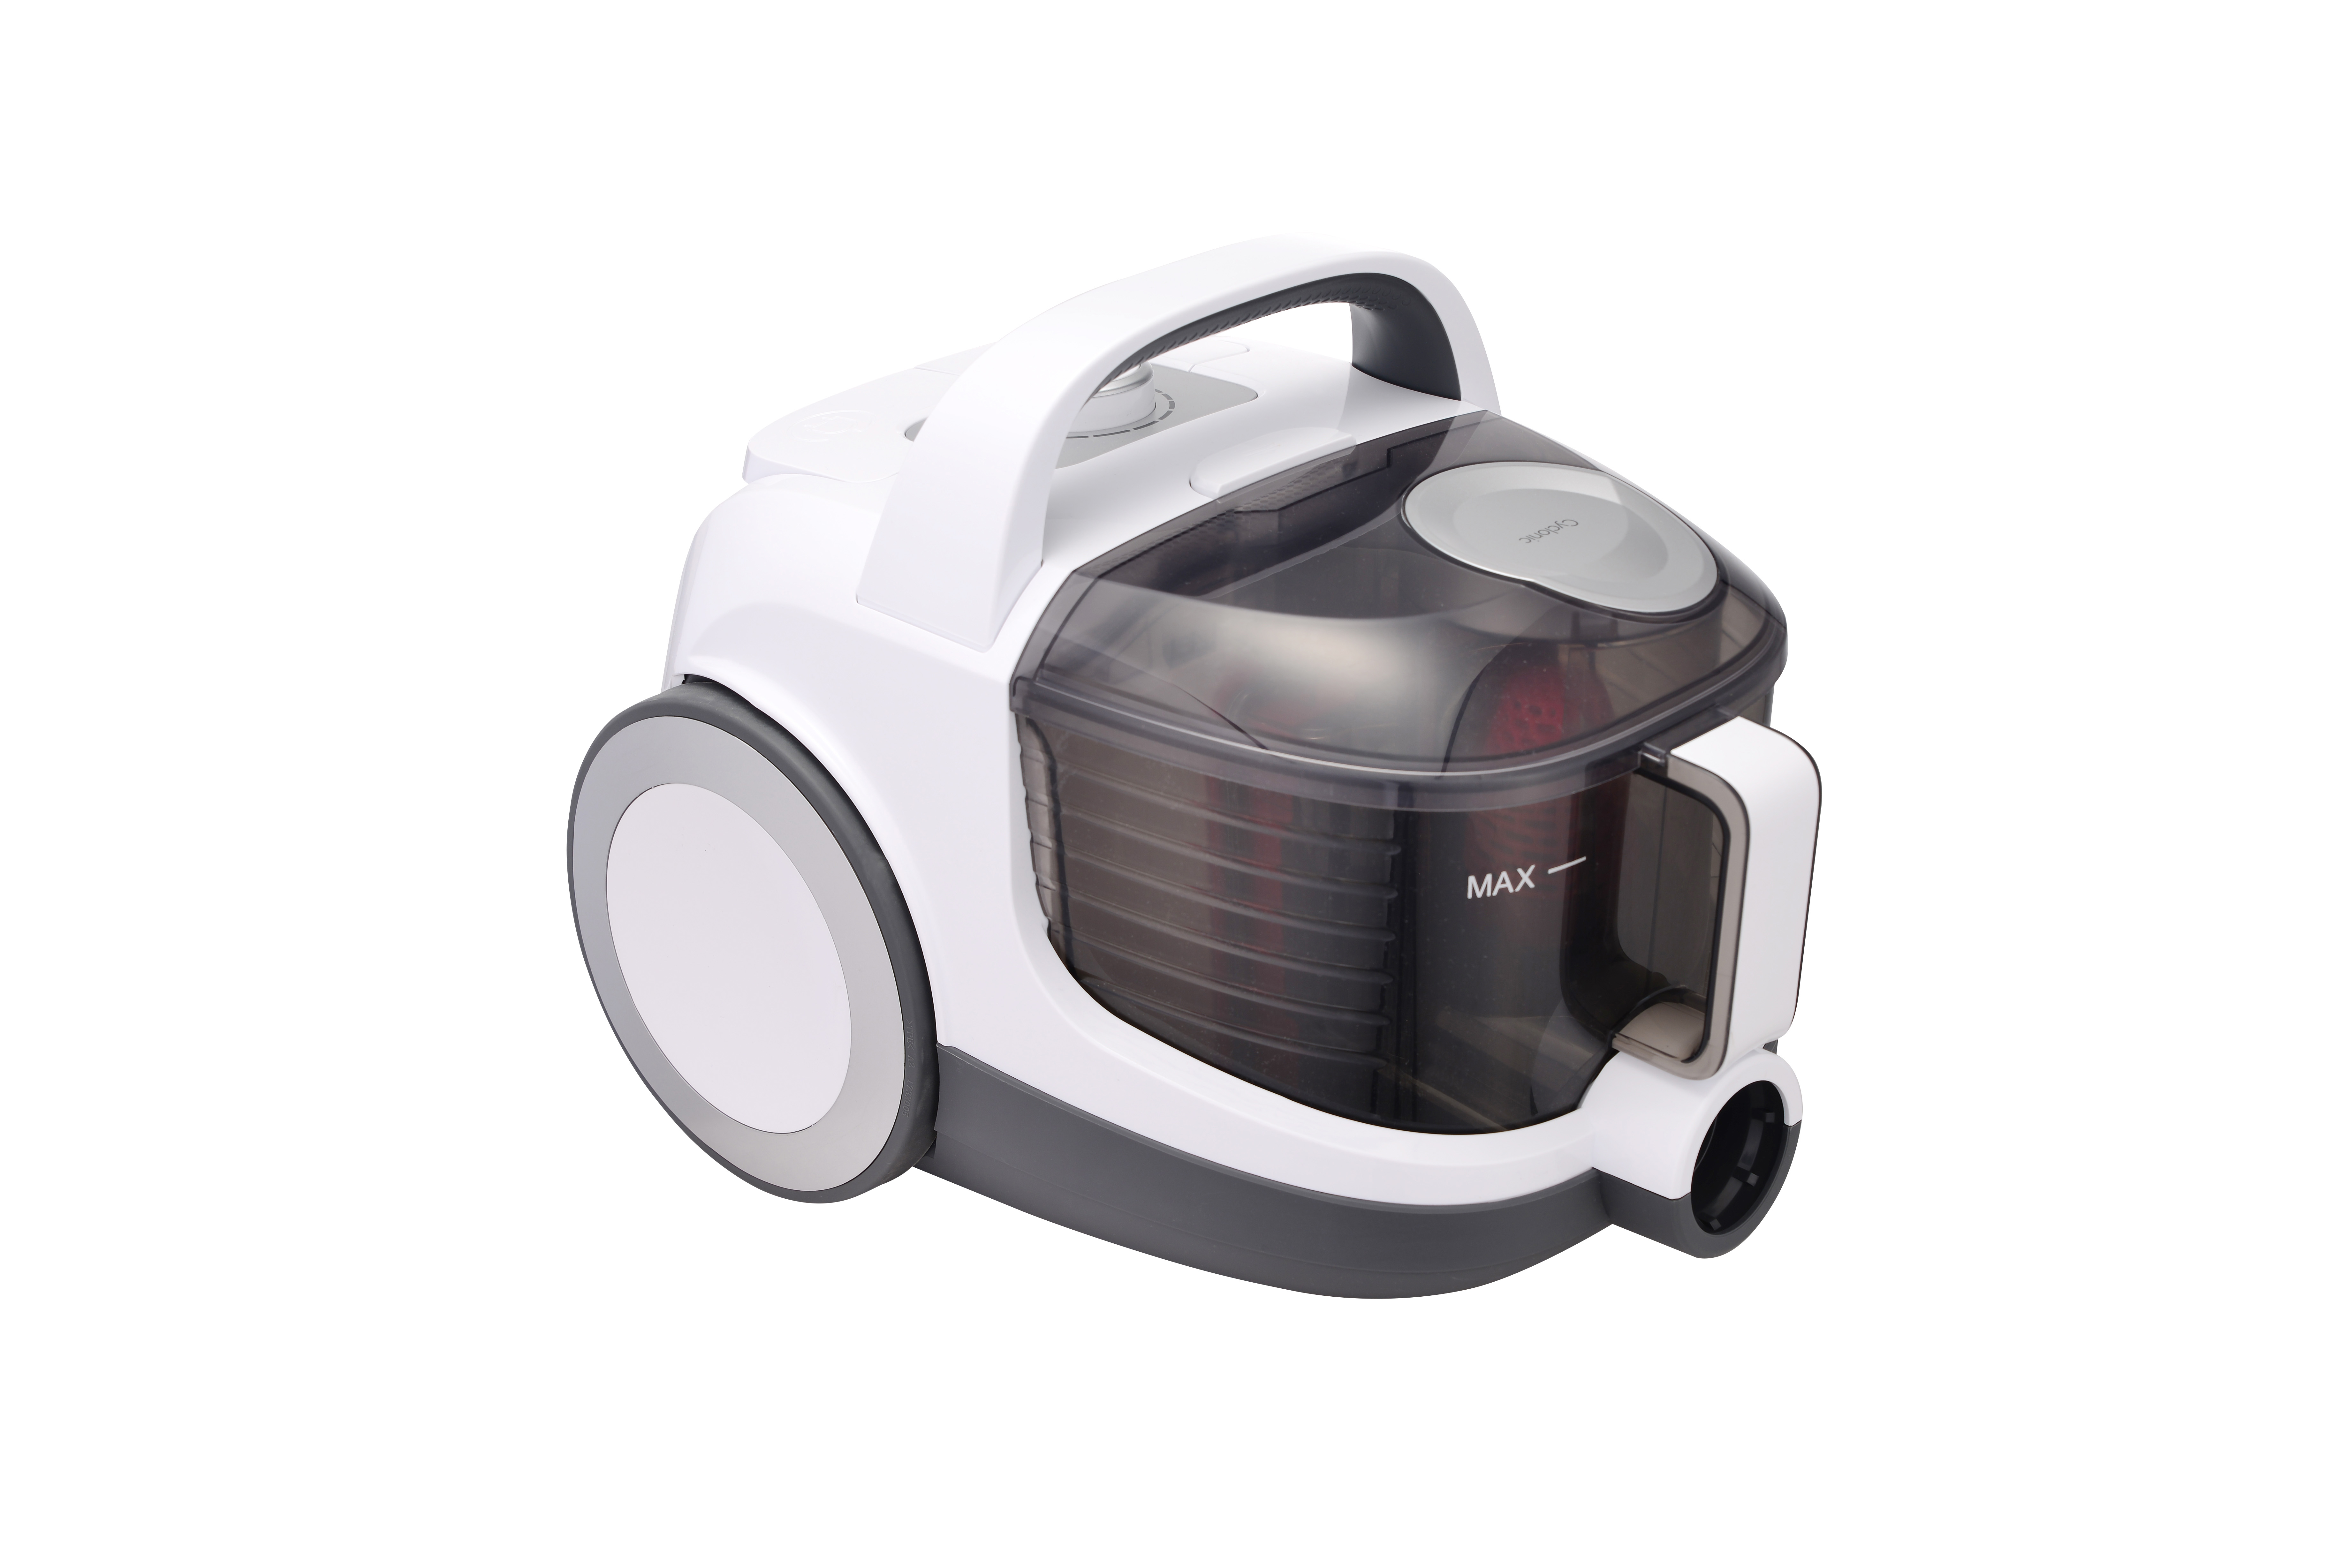 CJ173 Canister bagless cyclonic vacuum cleaner